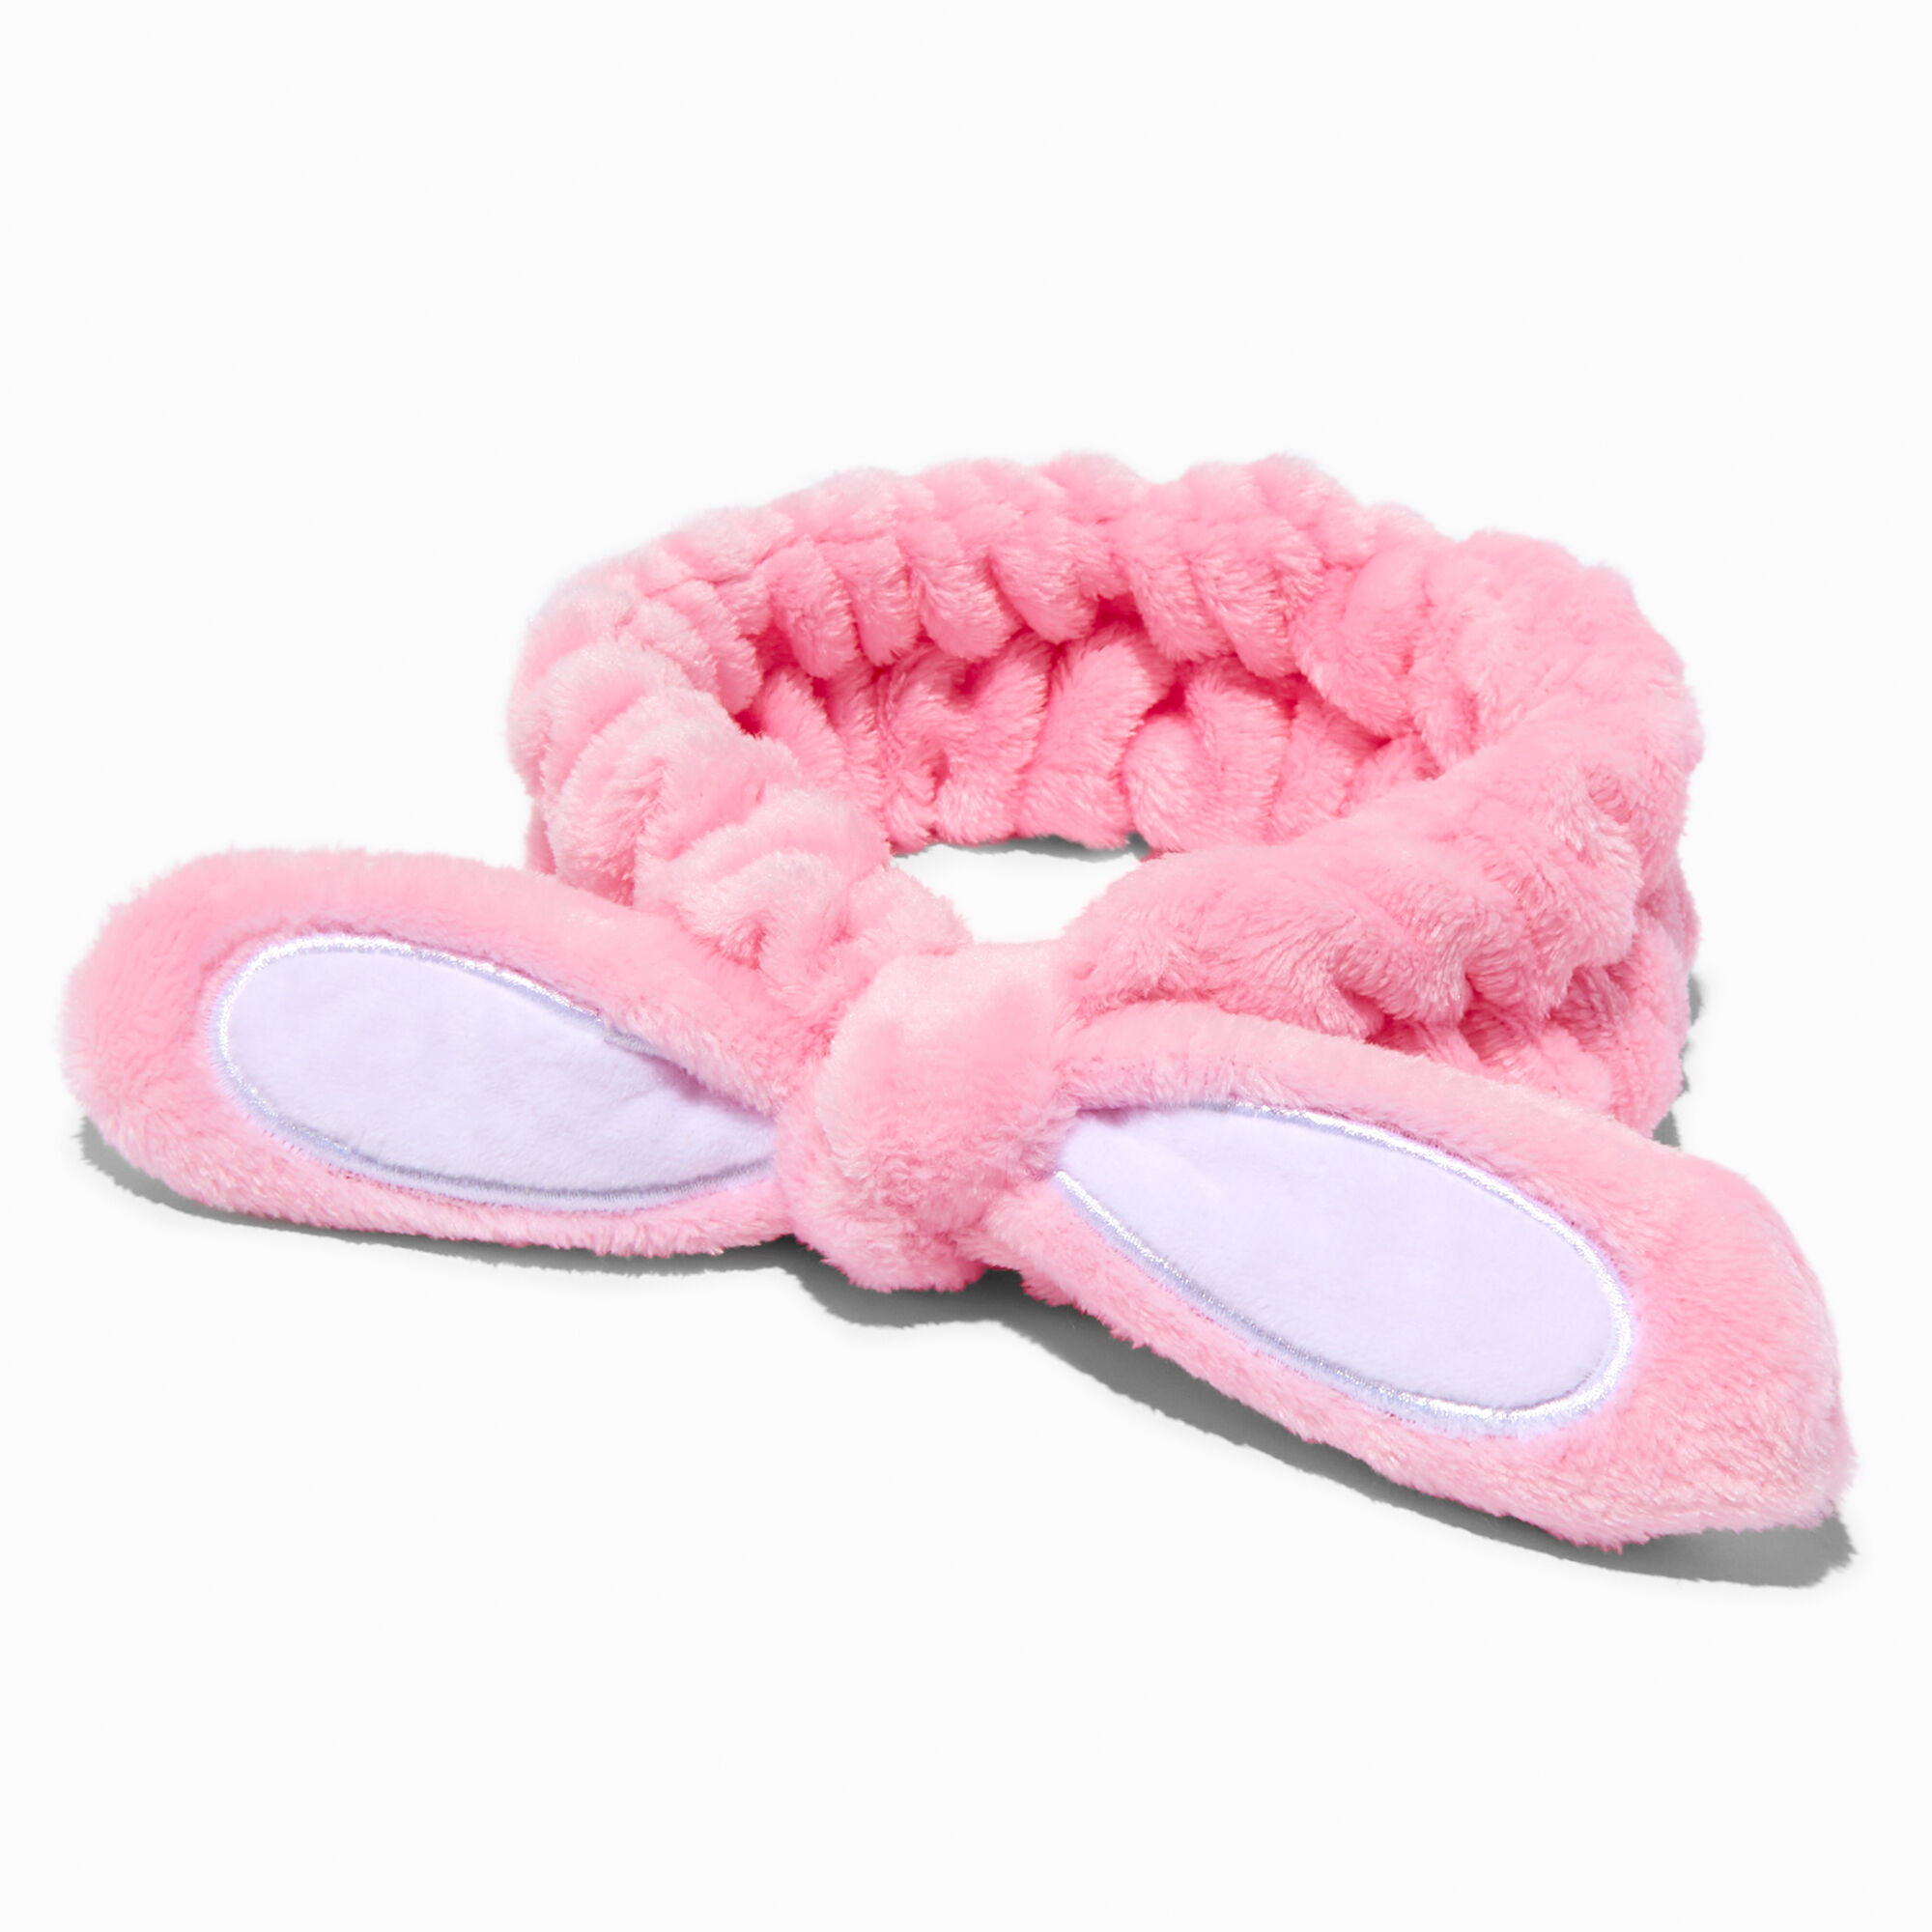 View Claires Bunny Makeup Bow Headwrap Pink information